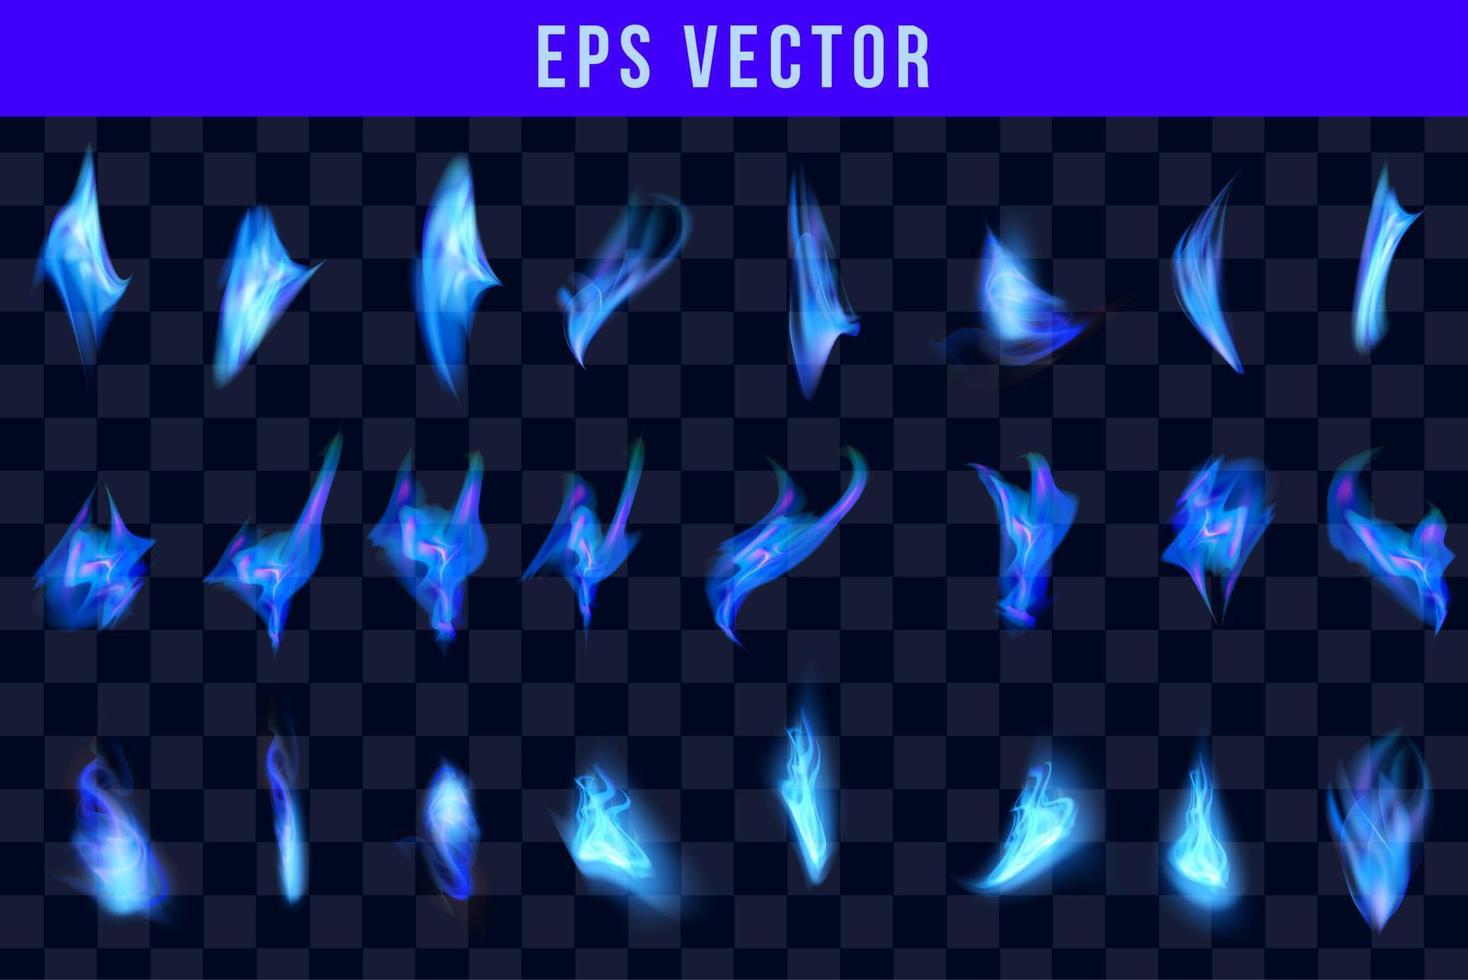 Blue fire flames realistic set of different forms and sizes on black background isolated vector illustration